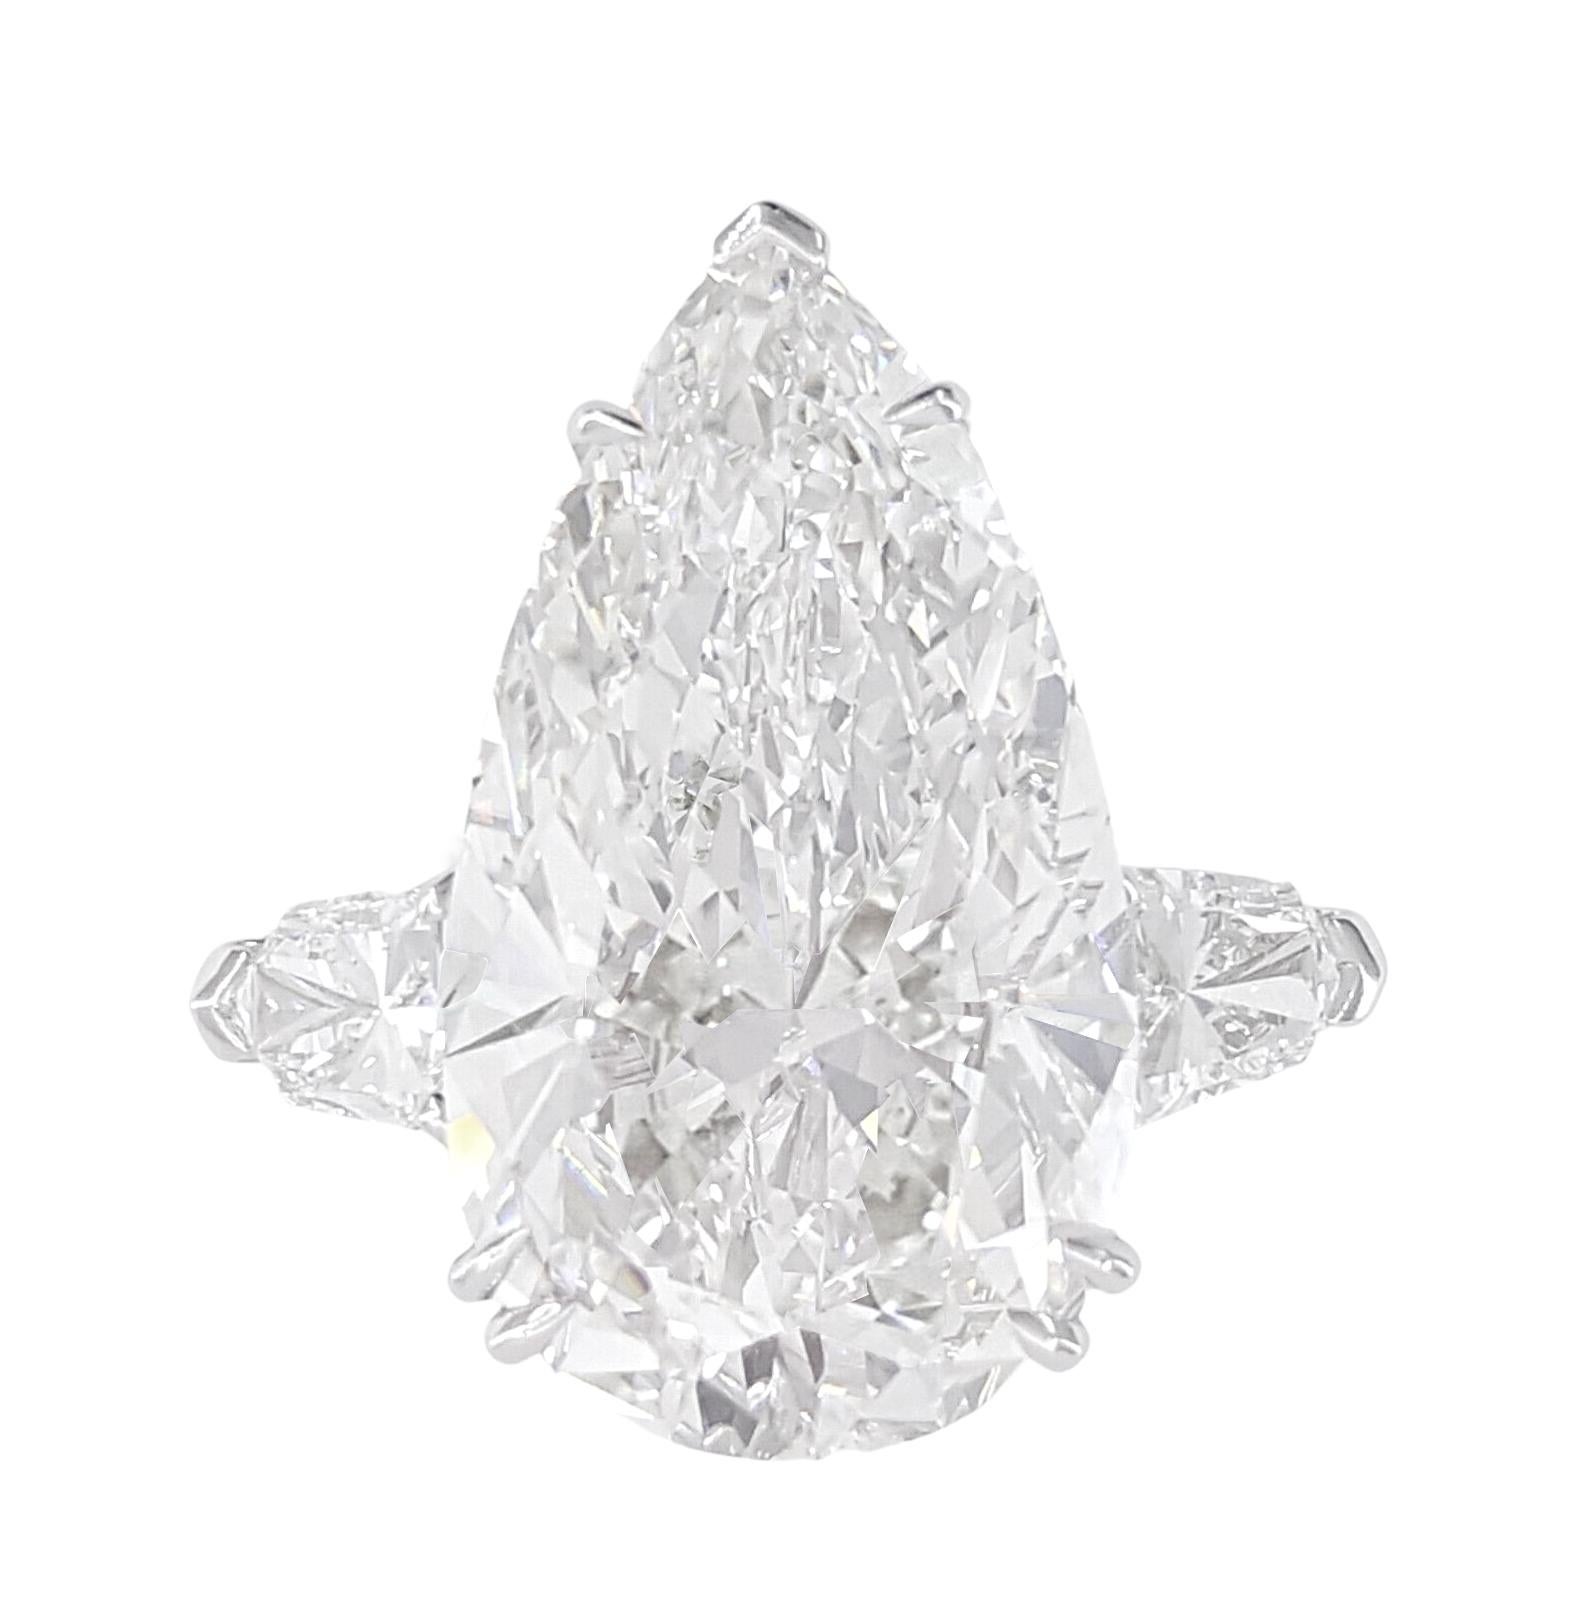 exquisite 3.90-carat pear-cut diamond ring, a true testament to timeless elegance and unparalleled craftsmanship. Each facet of this mesmerizing gem has been meticulously inspected and certified by GIA, ensuring authenticity and exceptional quality.